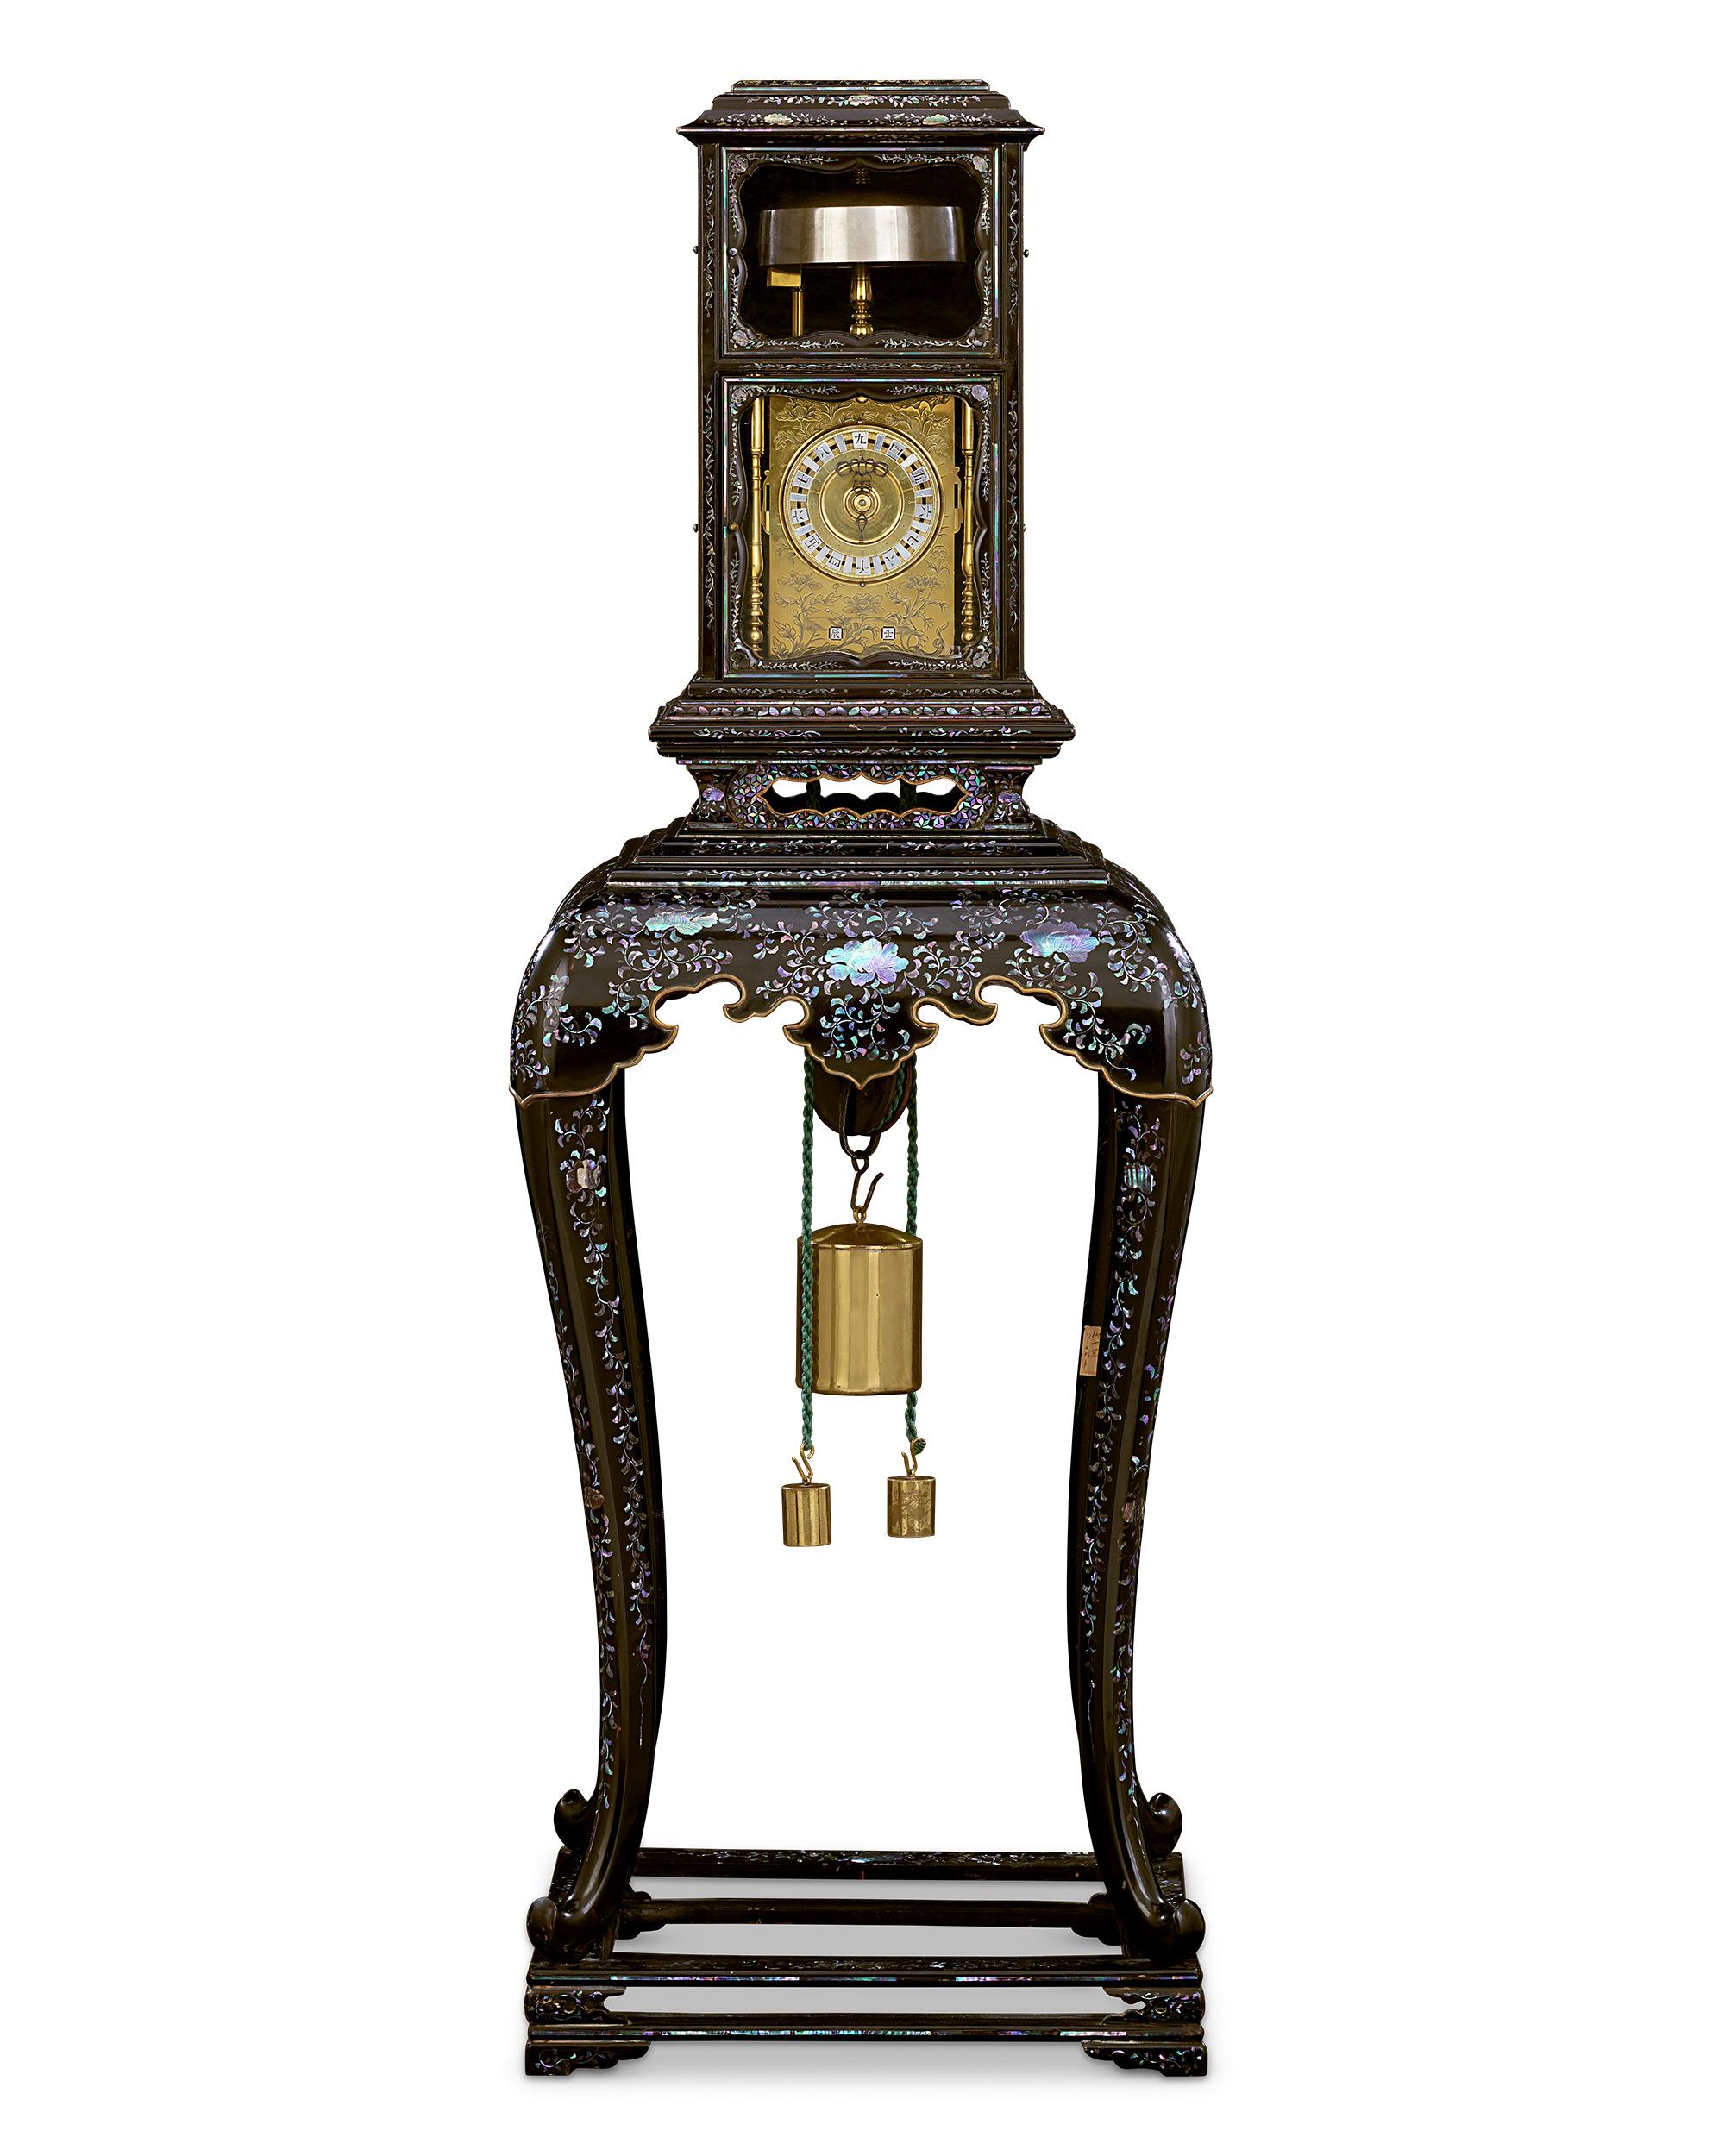 This magnificent Dai-dokei (pedestal clock) is one of the finest and rarest examples of Japanese horological artistry. These clocks were often used to adorn castles, corridors and prominent entrance halls, and for distinguished citizens during the